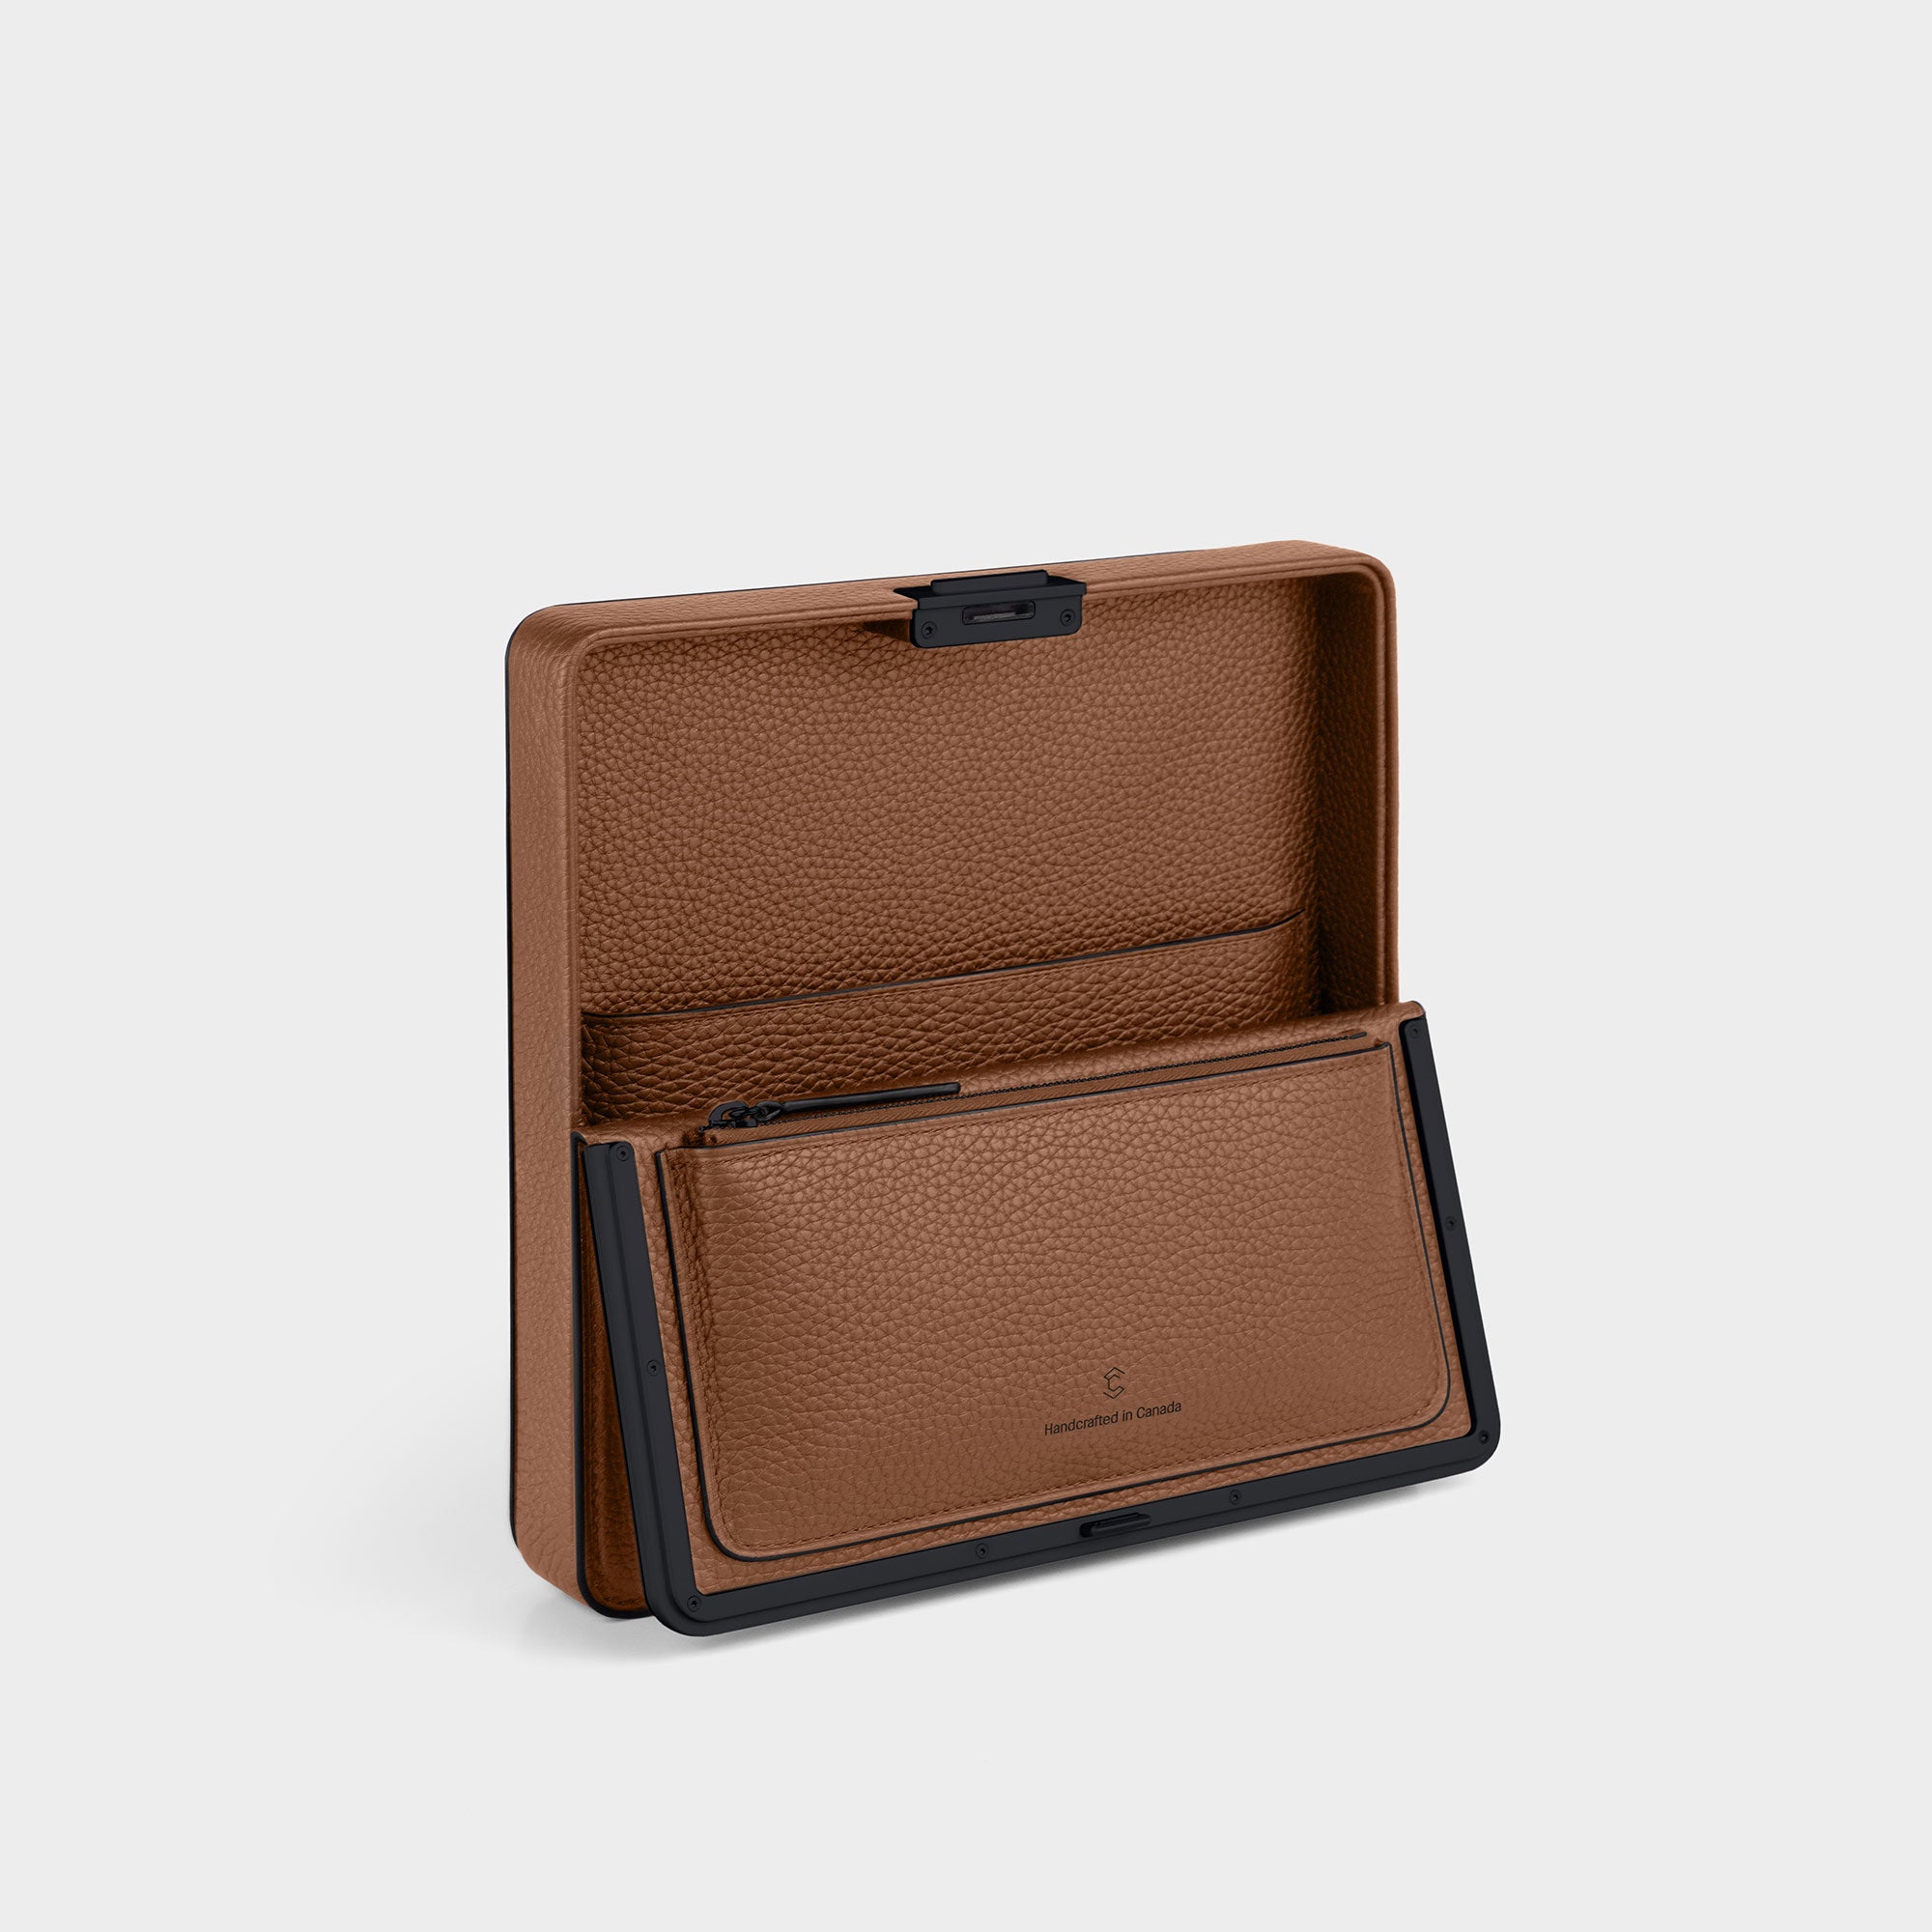 Product shot of open Fraser travel wallet in tan with black contrasting edges showing the convenient zipped pouch and large central compartment 